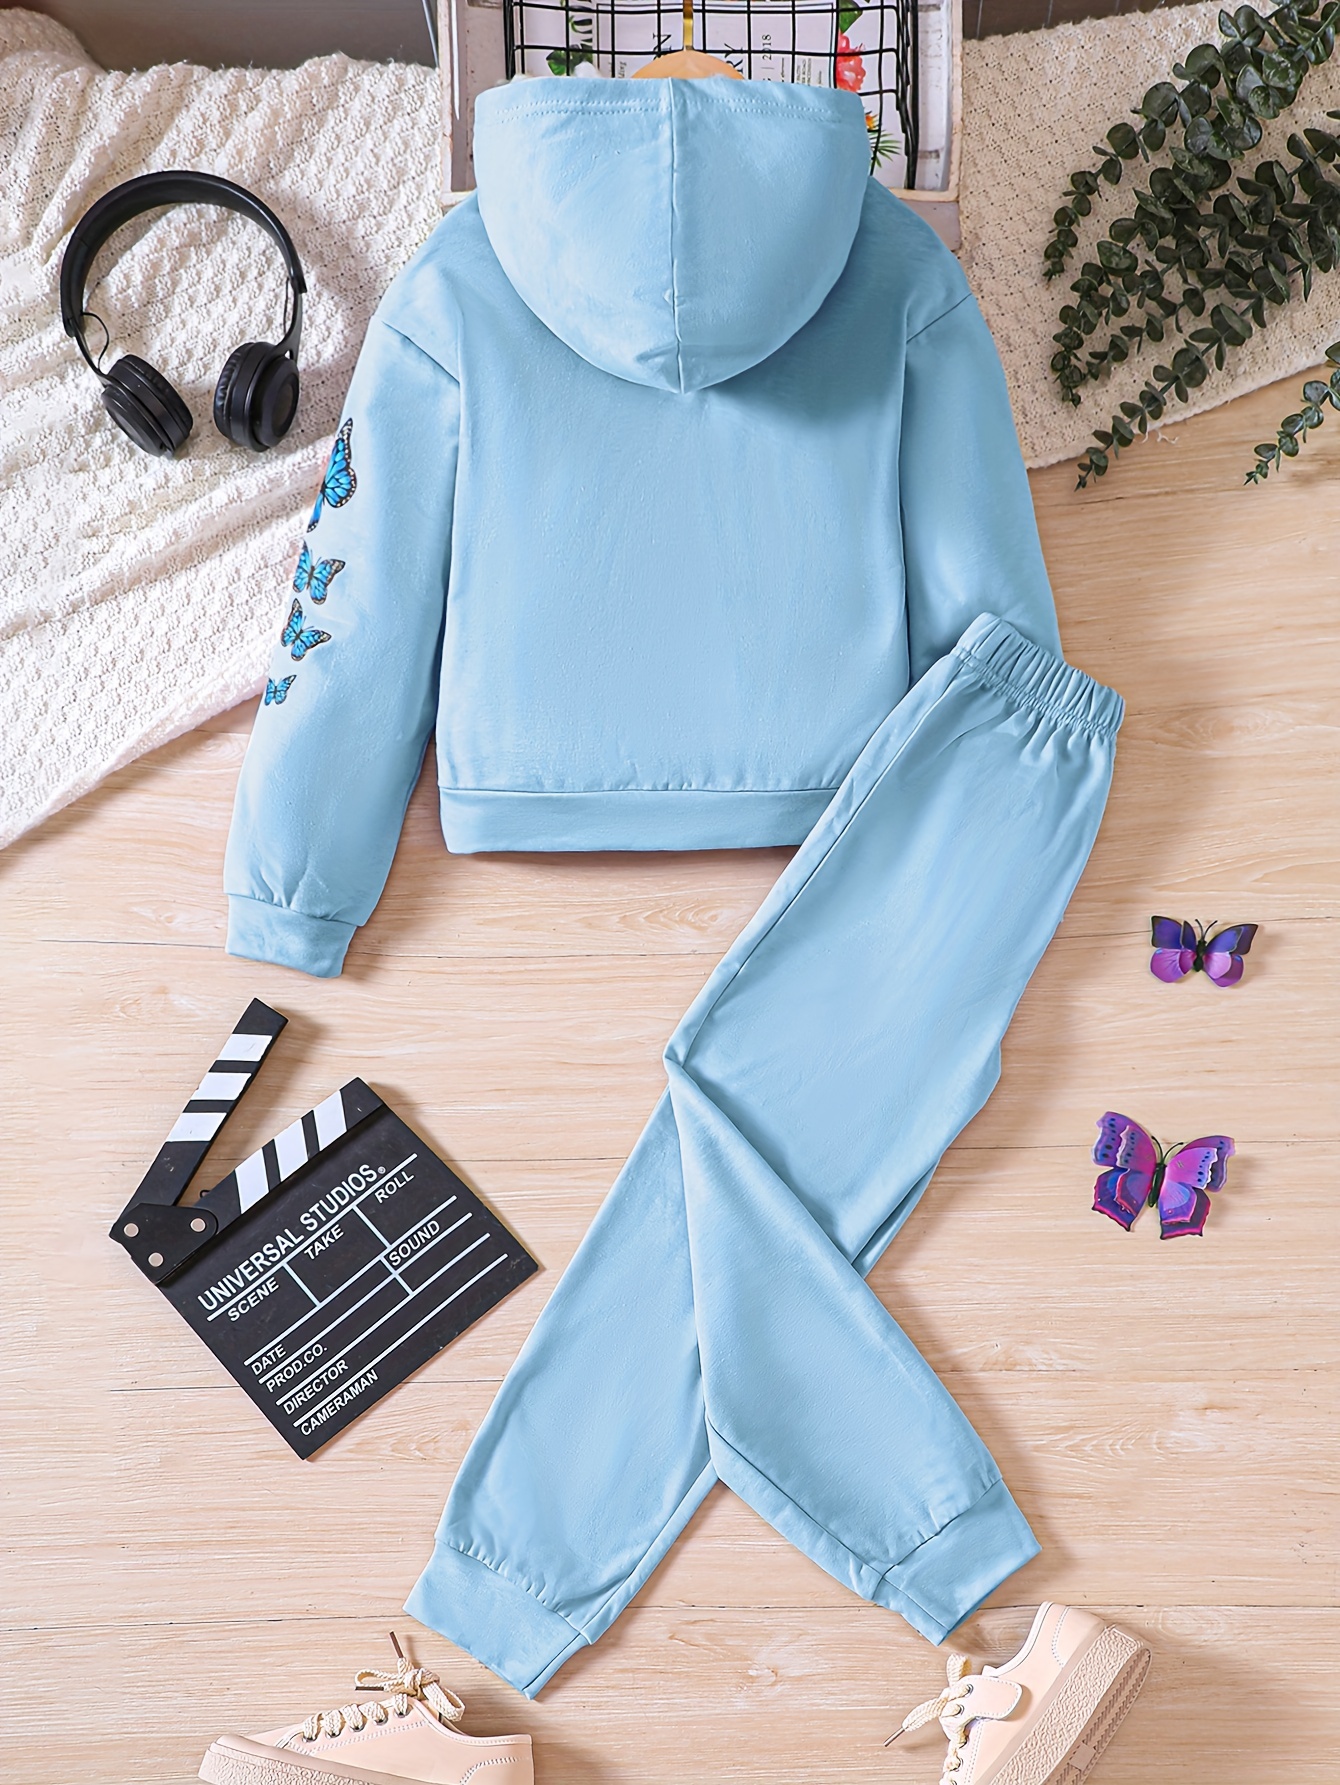 Butterfly Graphic Hoodie Top Jogger Pants Casual Sports Suit